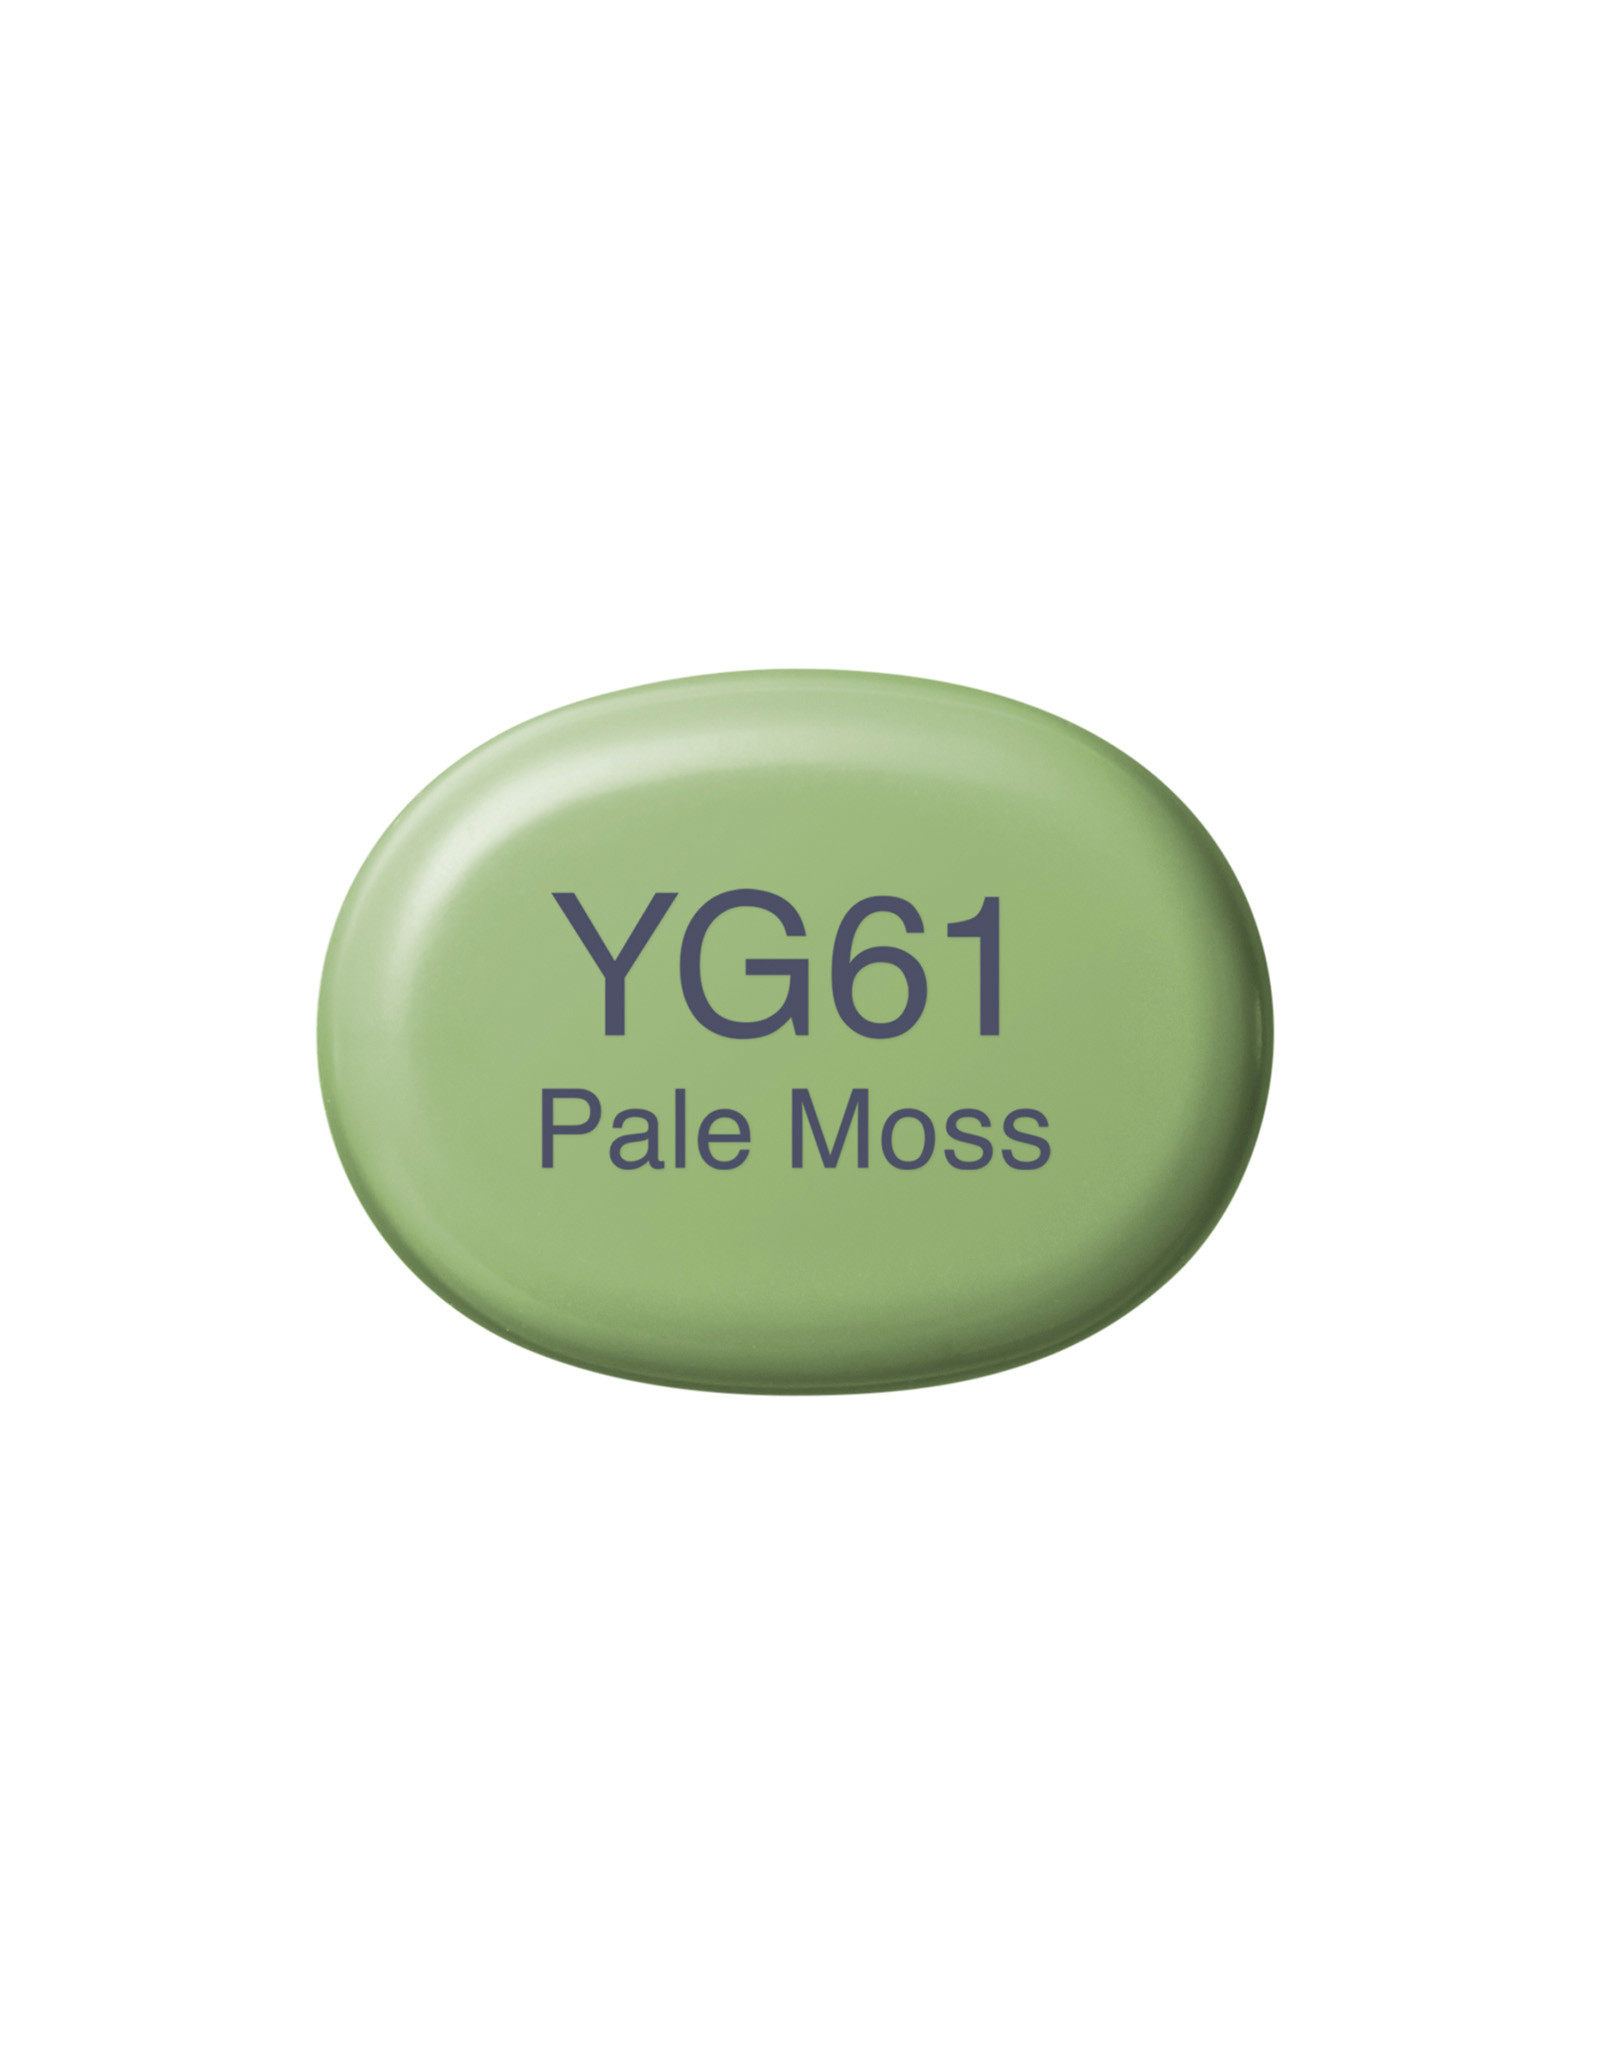 COPIC COPIC Sketch Marker YG61 Pale Moss